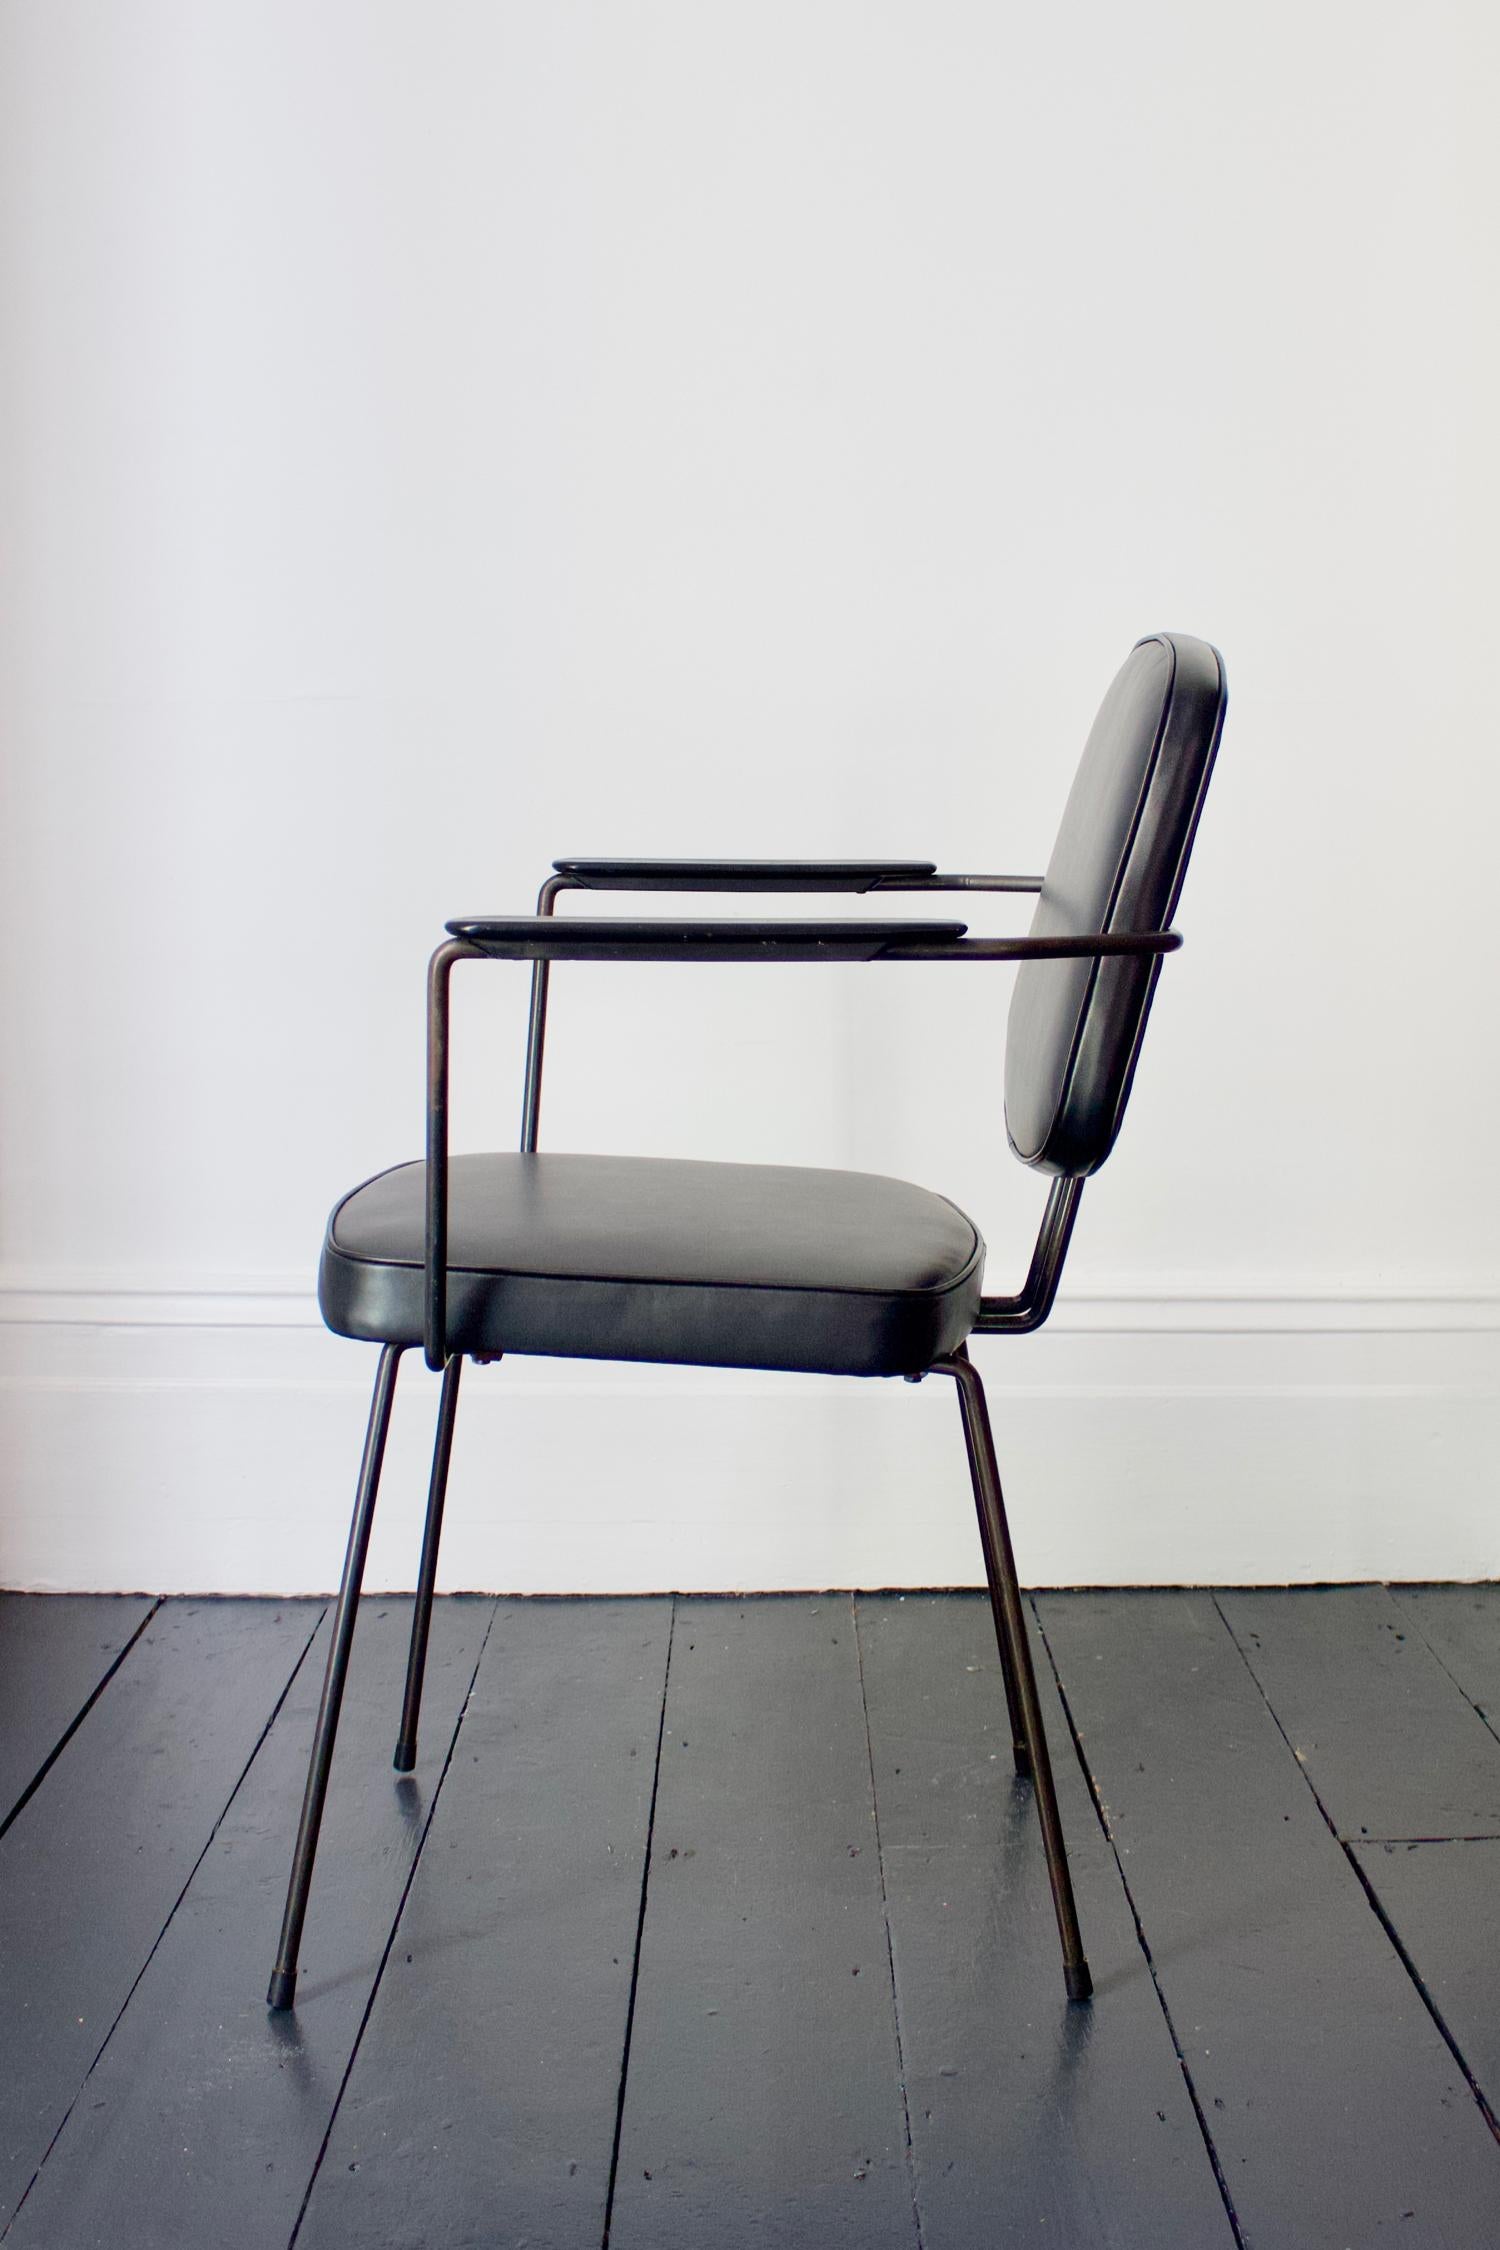 Steel Pair of Metal Chairs by Rudolf Wolf, Black Leather Upholstery, Netherlands